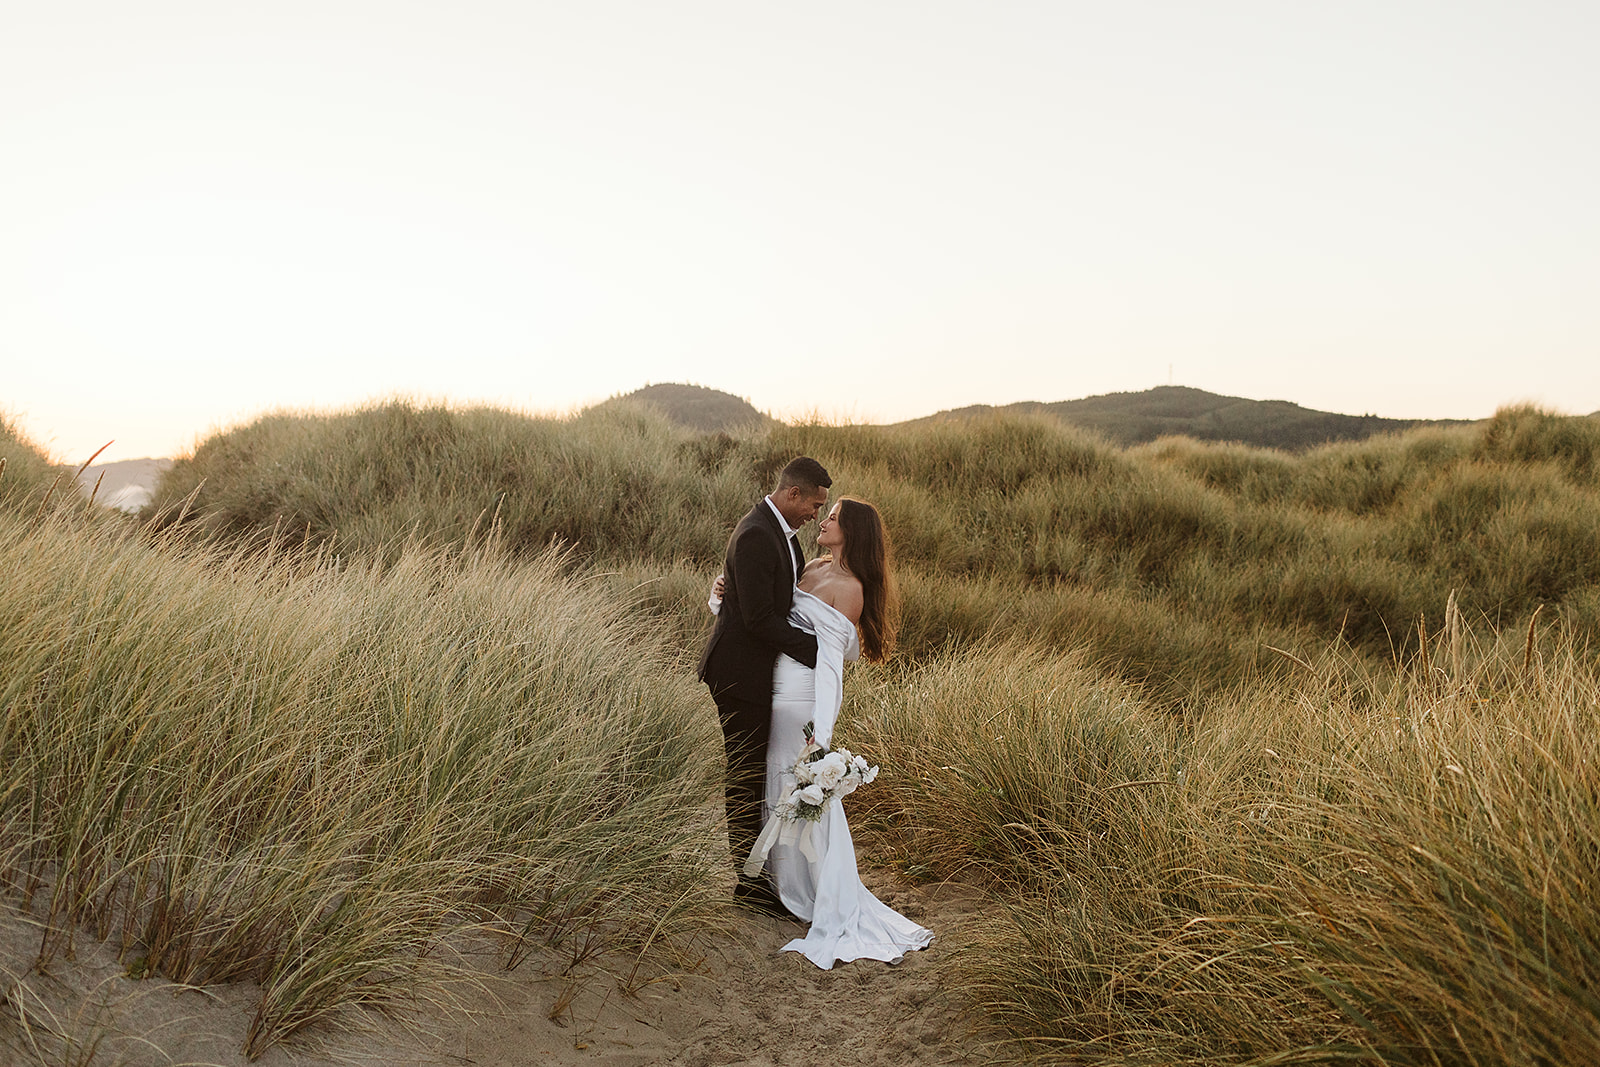  A couple who eloped in Neskowin Beach say their vows along the oregon coast